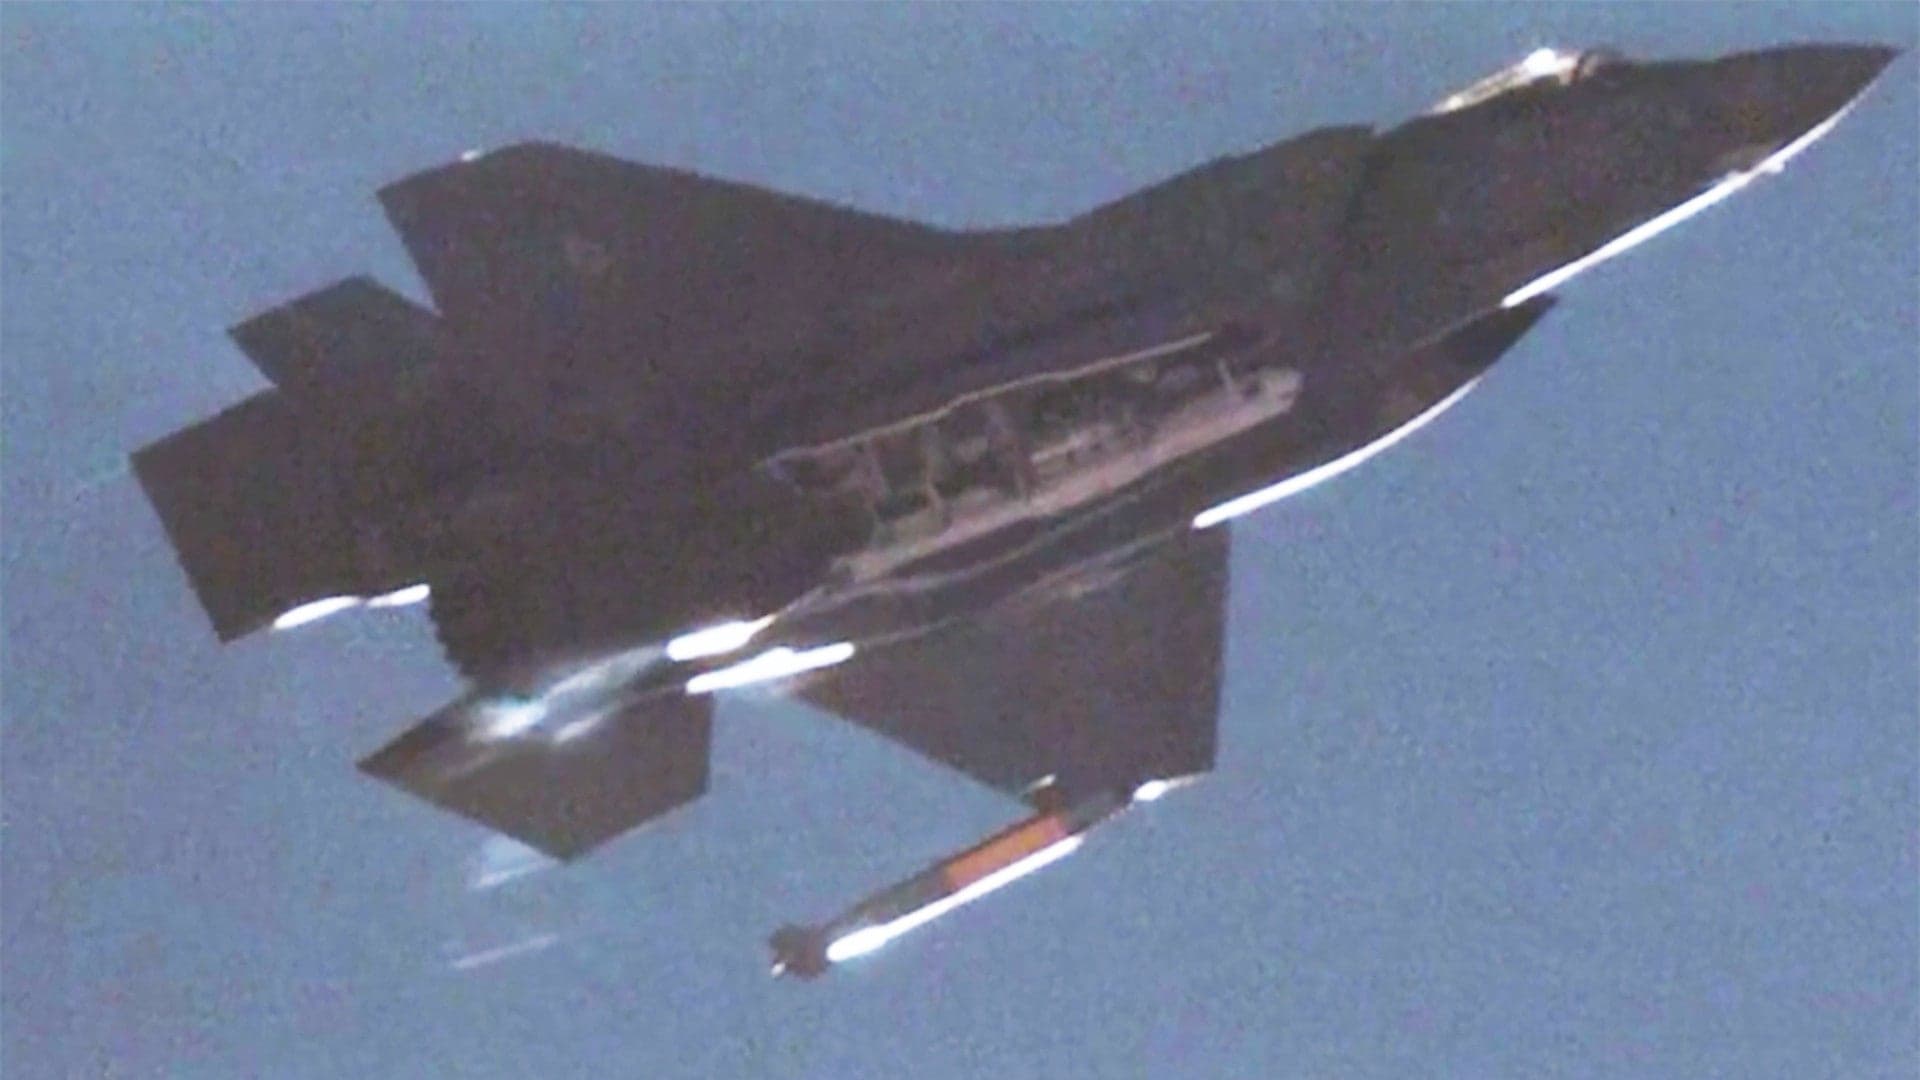 Watch An F-35 Drop A B61 Nuclear Bomb In This First-Ever Declassified Video